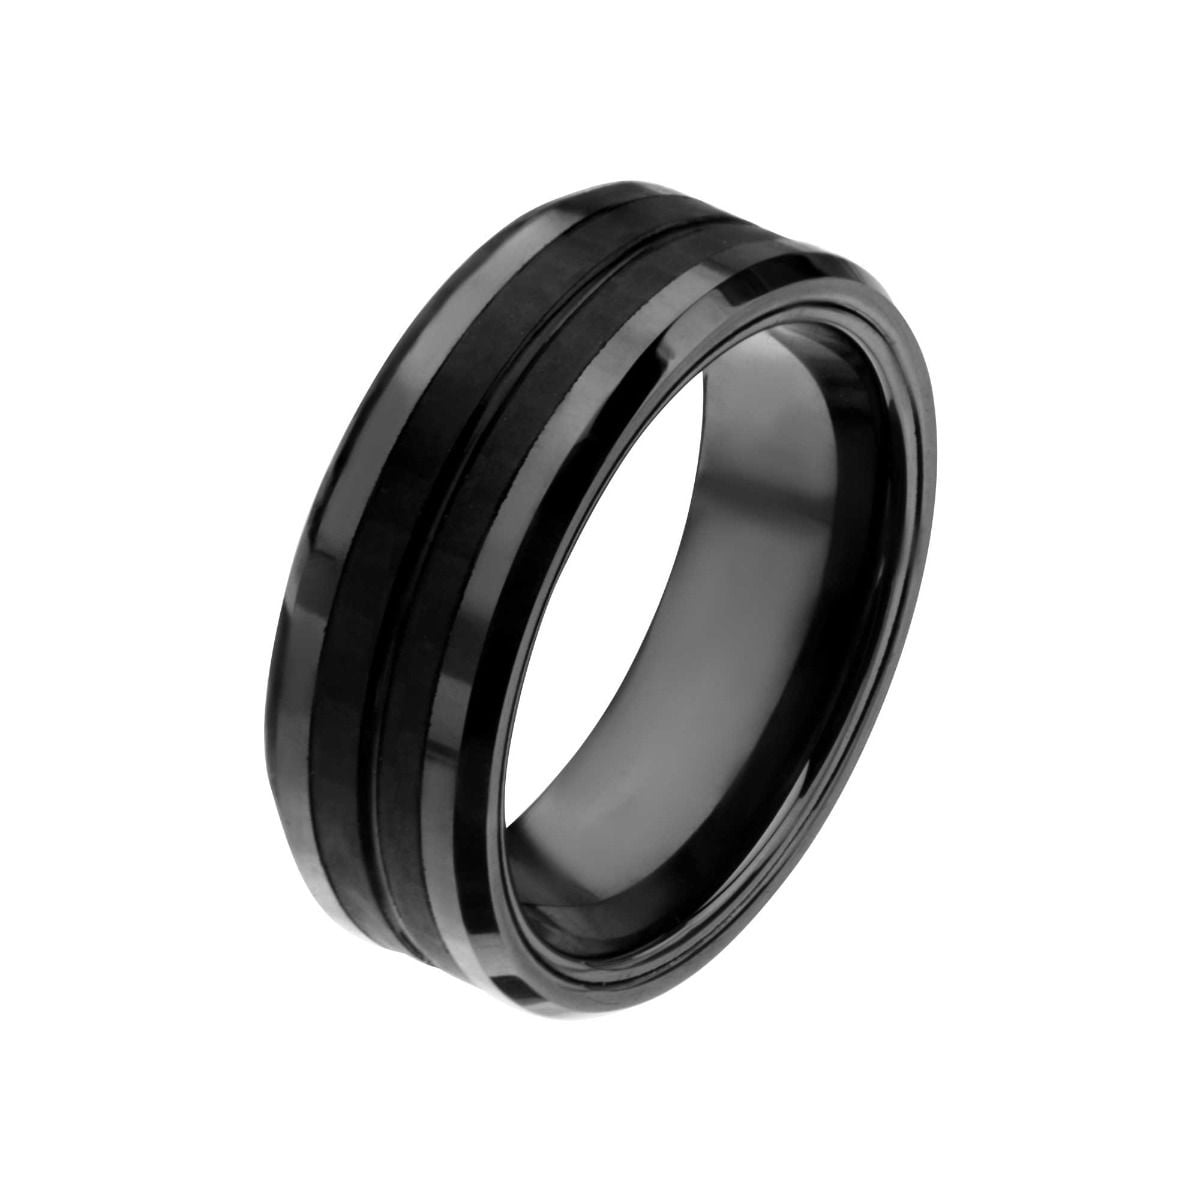 CROSS ON BLACK PLATED  316L Stainless Steel Ring SIZES 9-13 